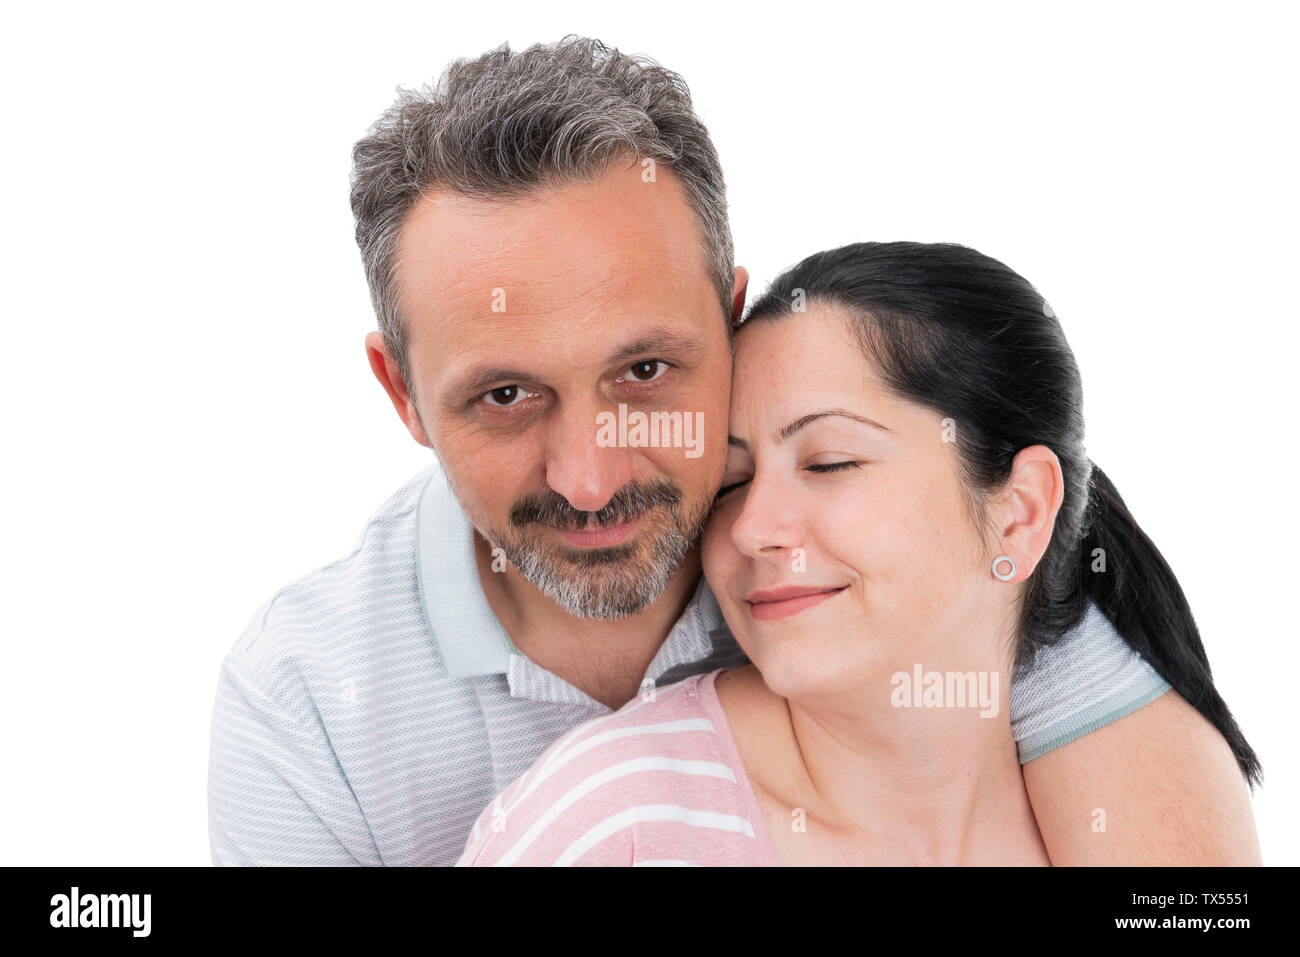 Closeup portrait of smiling man and woman couple hugging as cute relationship concept isolated on white studio background Stock Photo